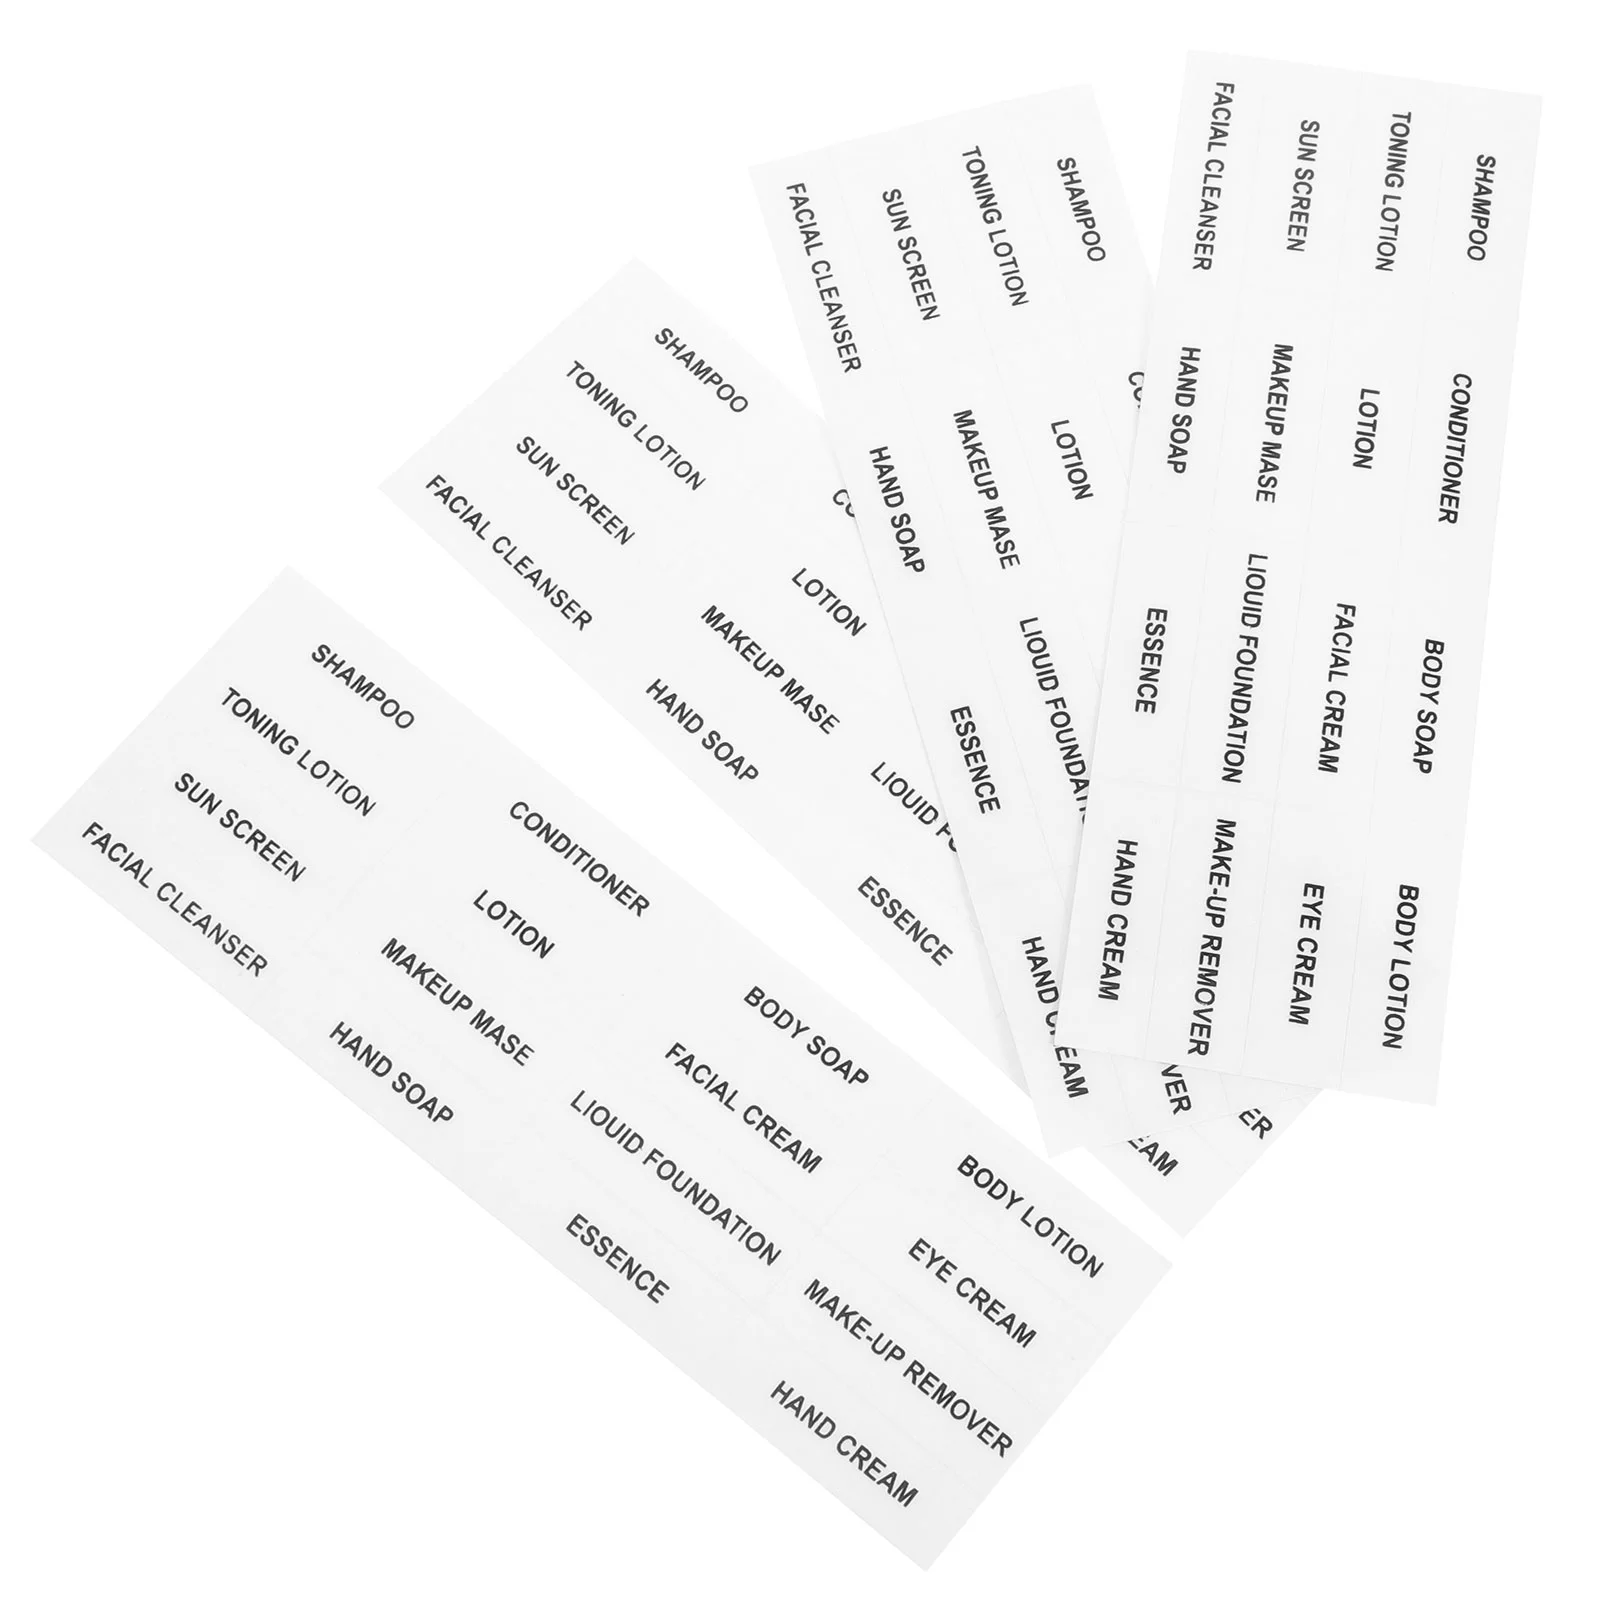 

10 Pcs Cosmetics Sub-bottle Stickers Waterproof Labels Makeup Containers Pvc Self-adhesive Shampoo Travel Tags